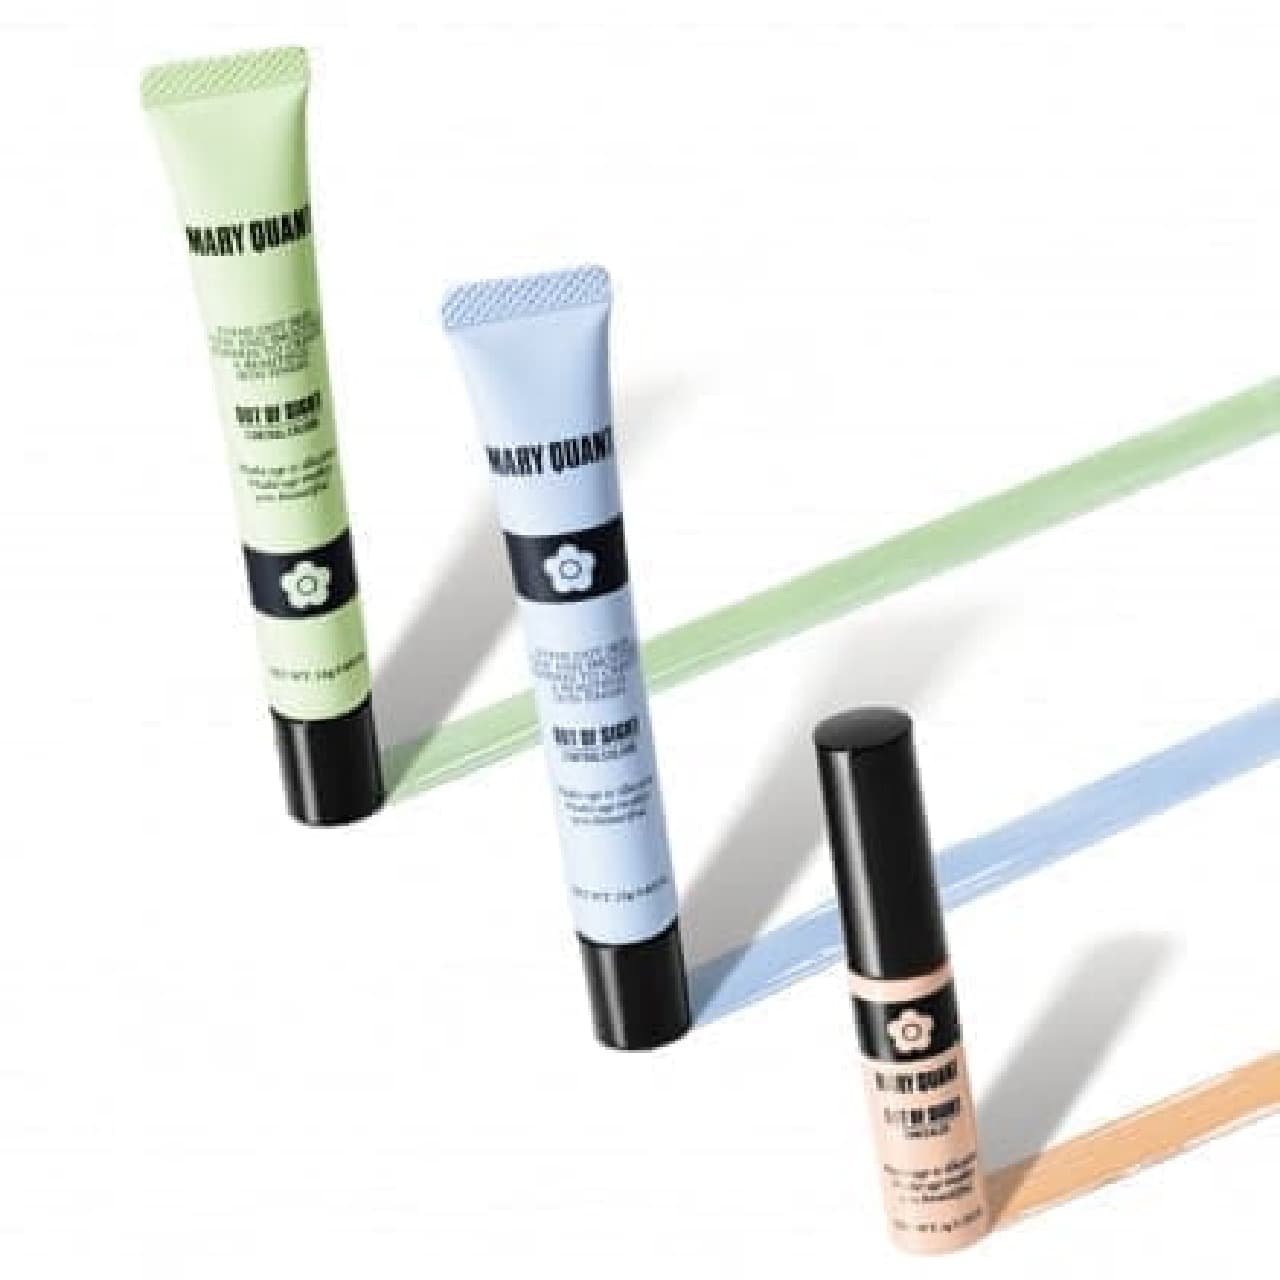 Mary Quant "Out of Sight Control Color" and "Out of Sight Concealer"